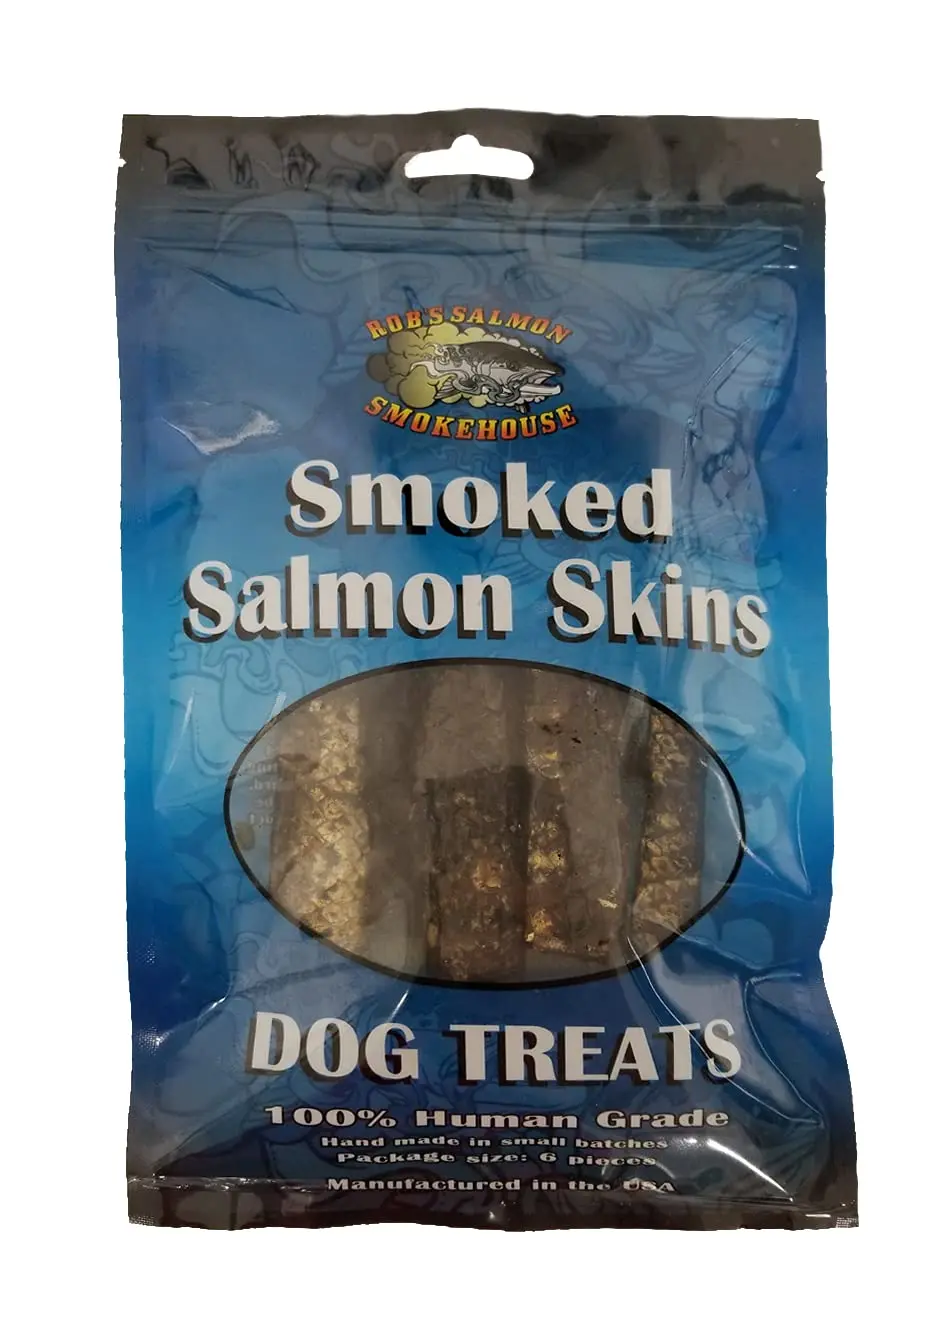 smoked salmon skin for dogs - What does salmon skin do for a dog